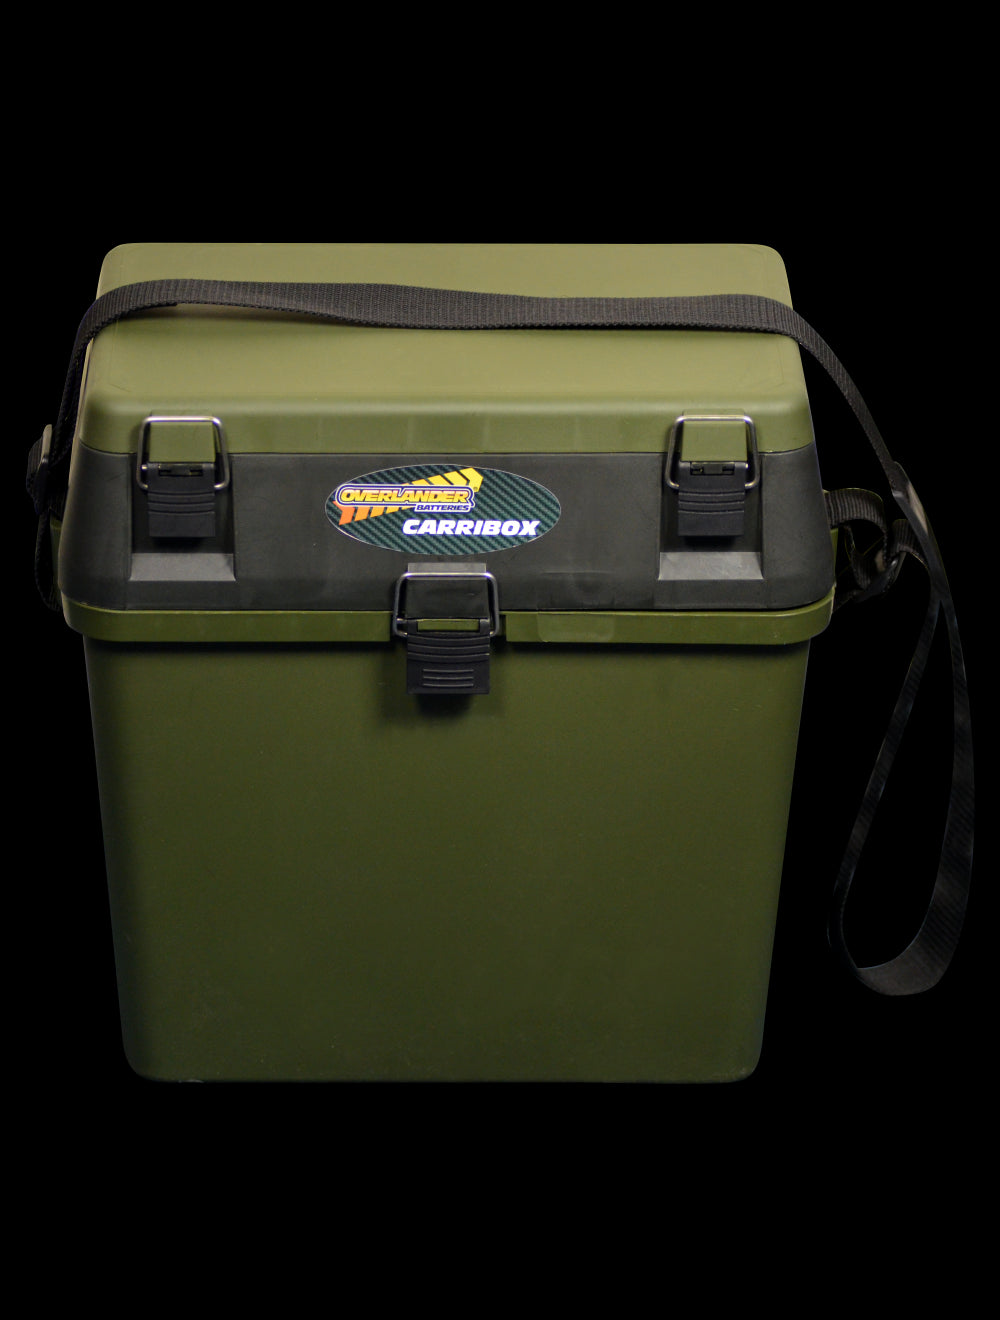 Overlander Green Carribox Compact Seat & plastic carry case 2507